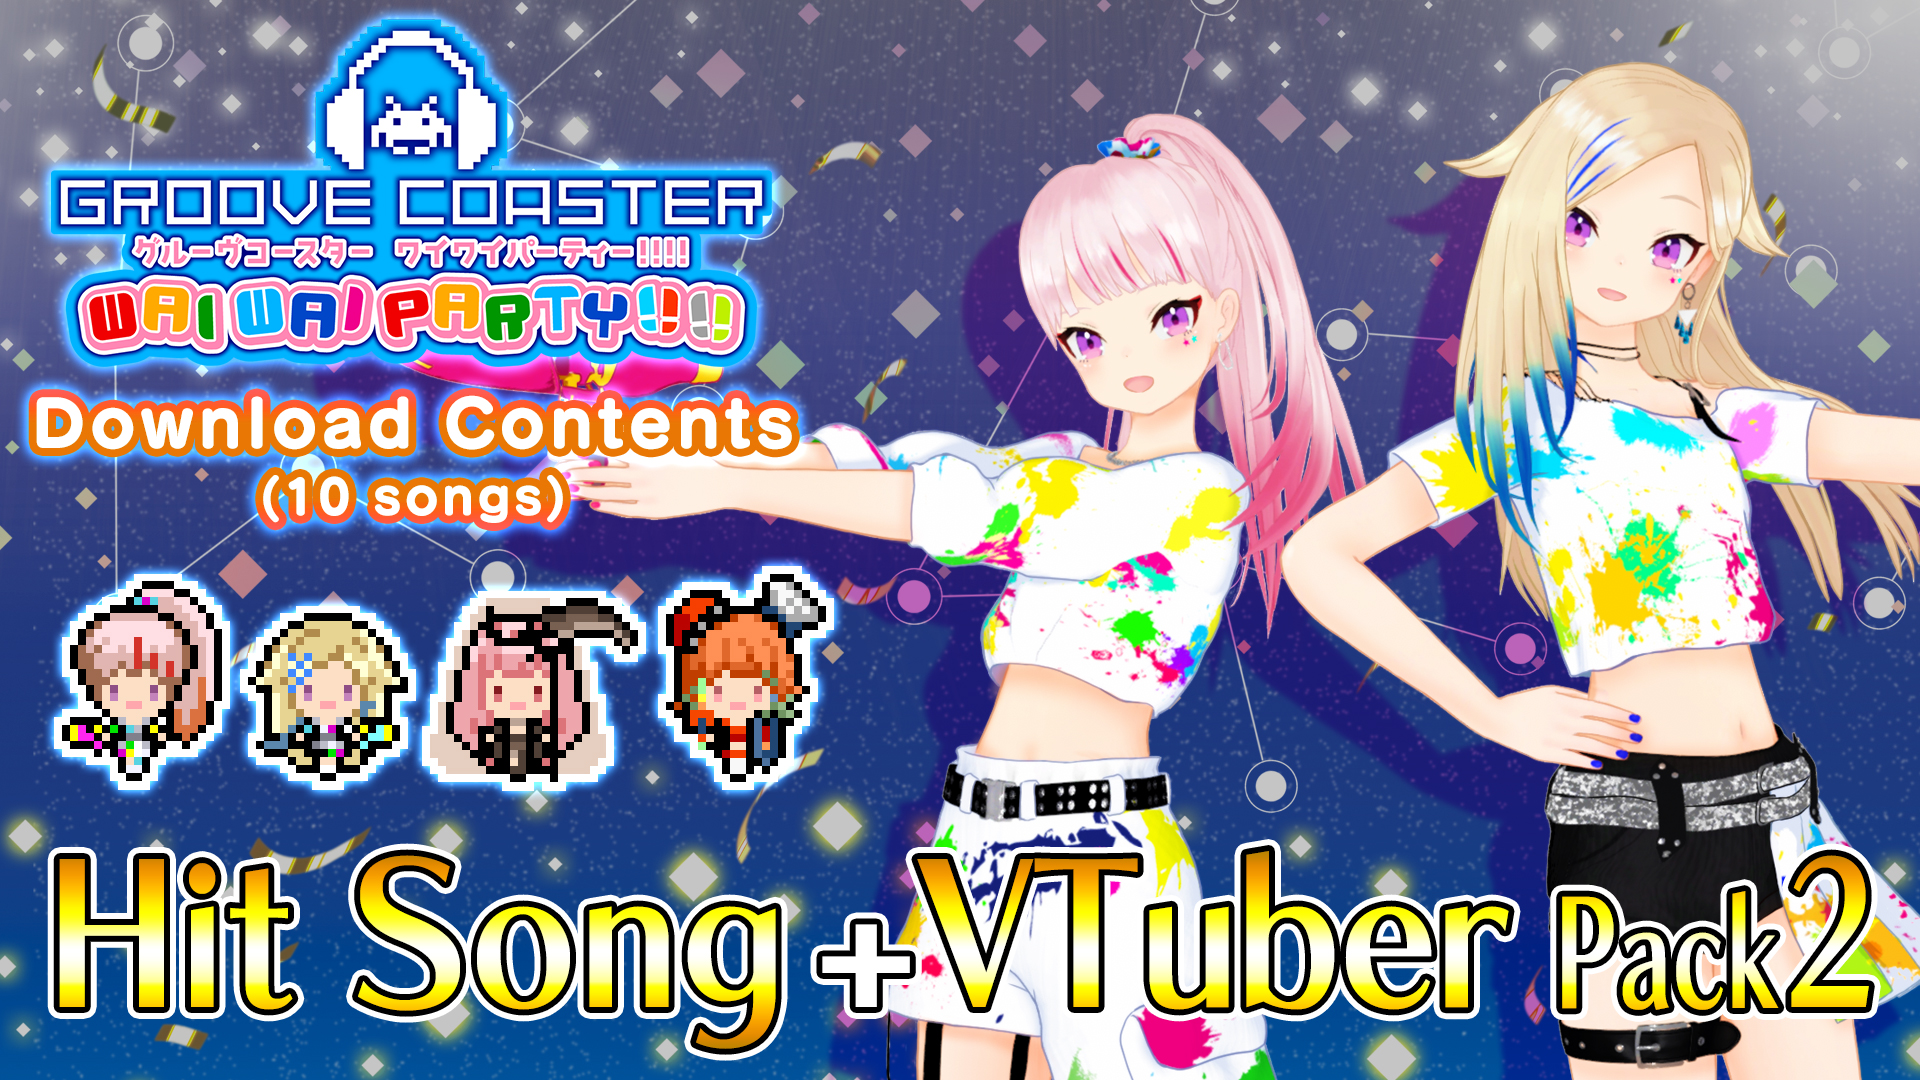 Hit Song Vtuber Pack 2 Groove Coaster Wai Wai Party Nintendo Switch Nintendo